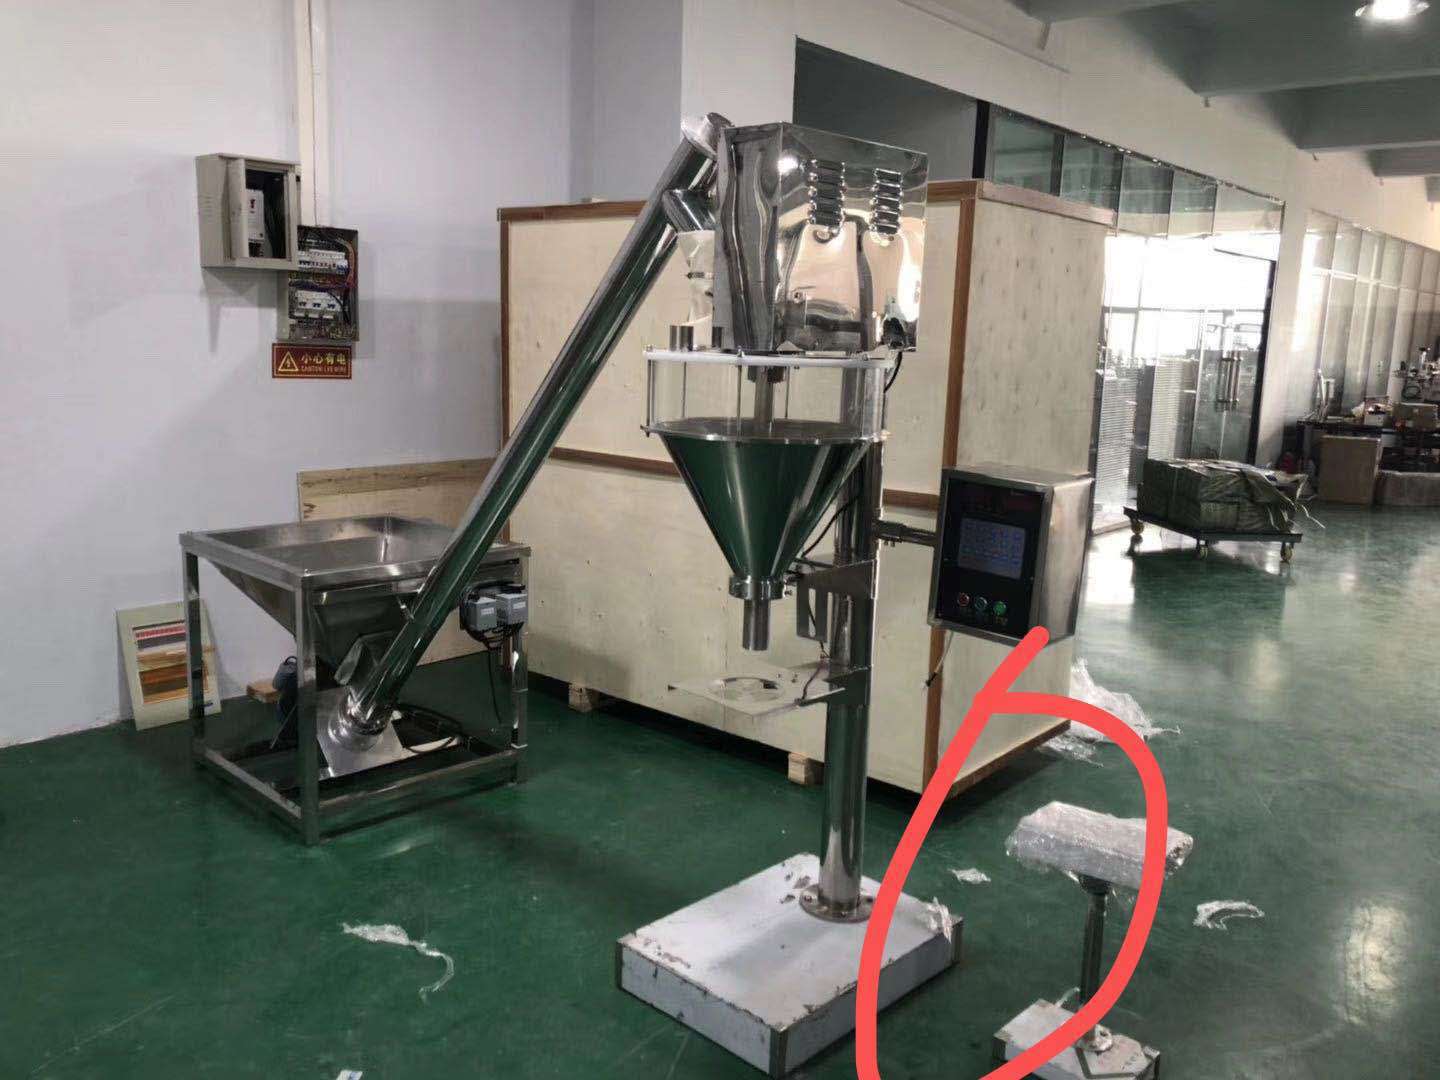 Weighing system